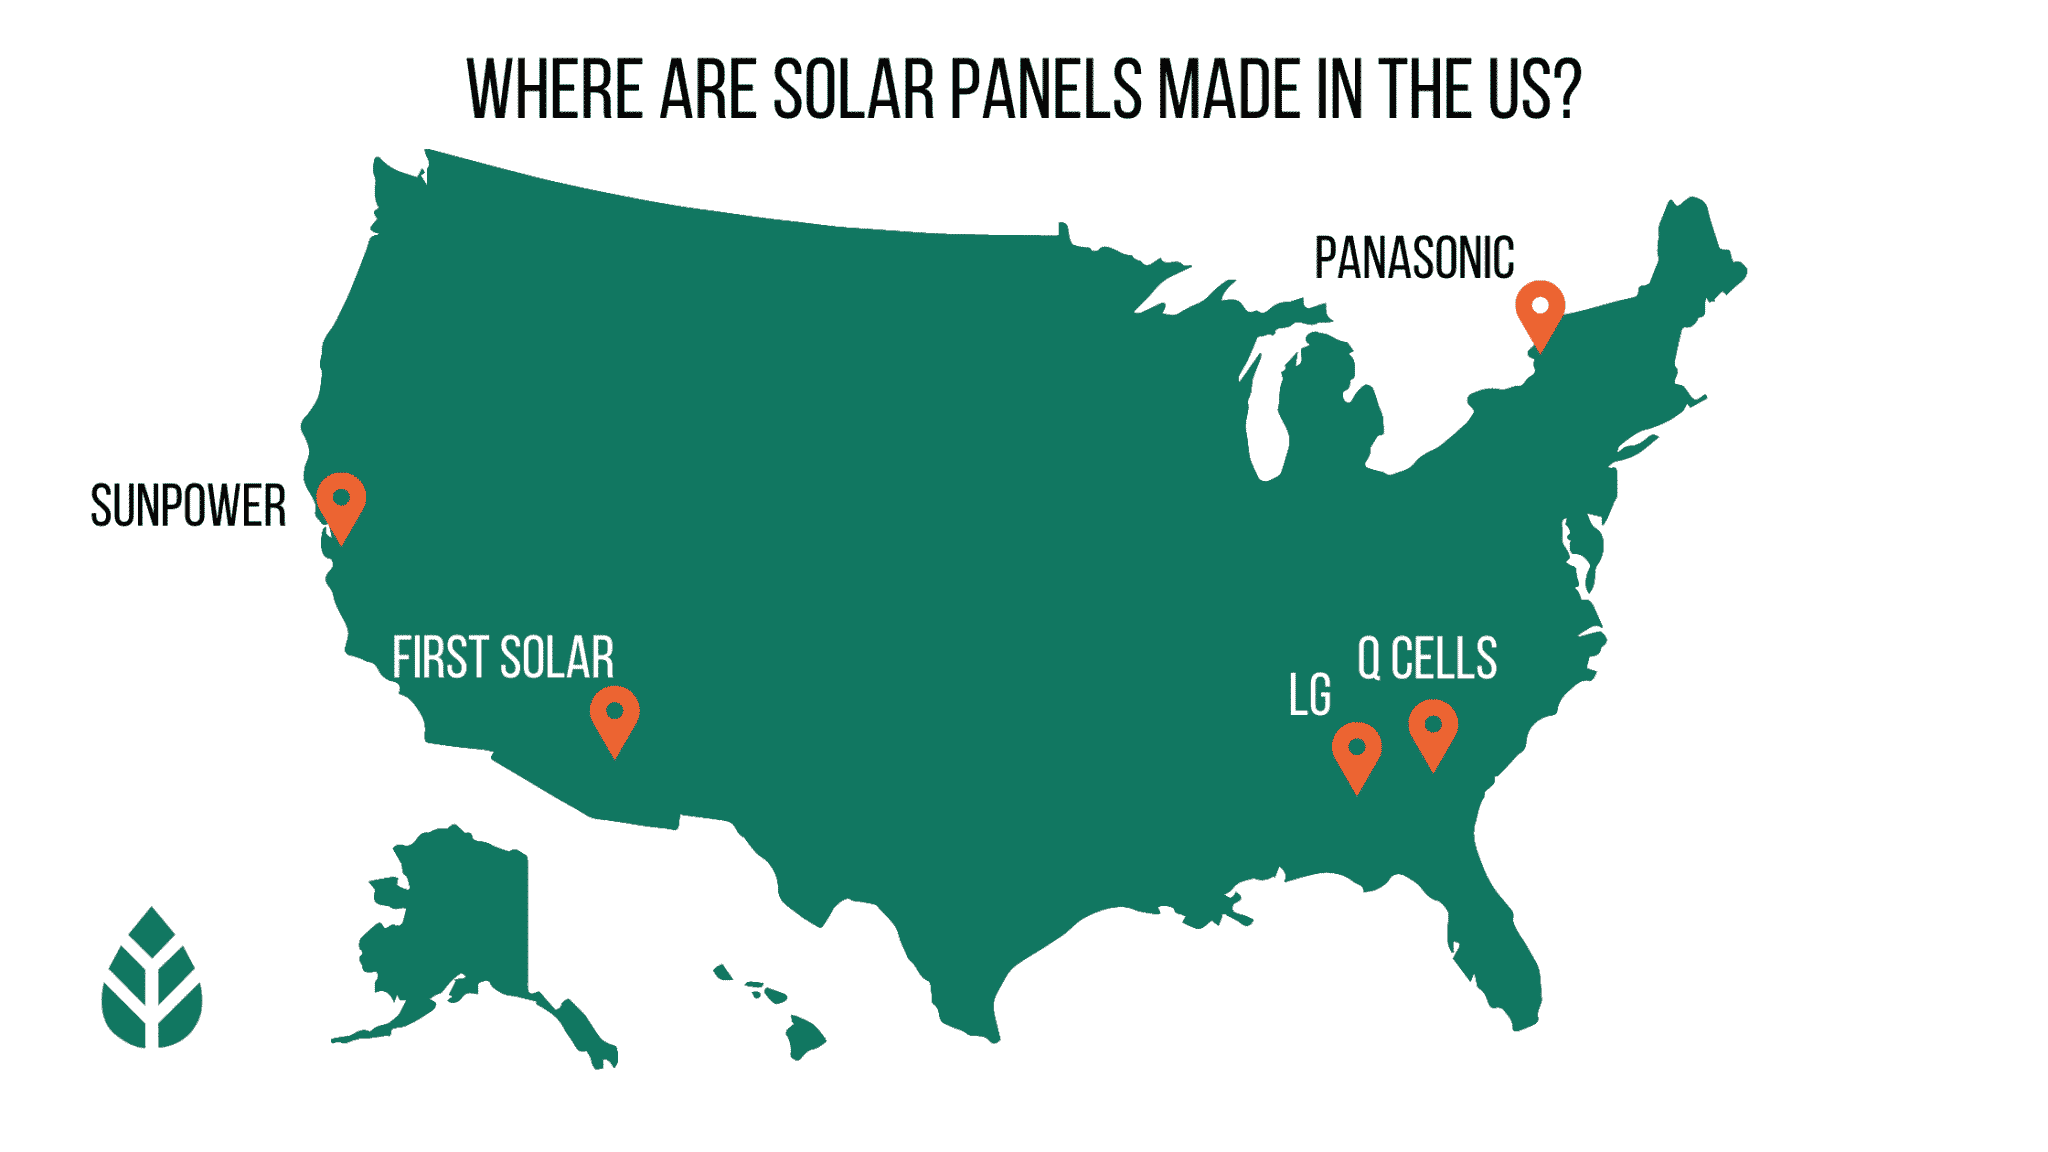 map of where solar panels are made in the U.S. including headquarters of domestic manufacturing facilities for top solar companies